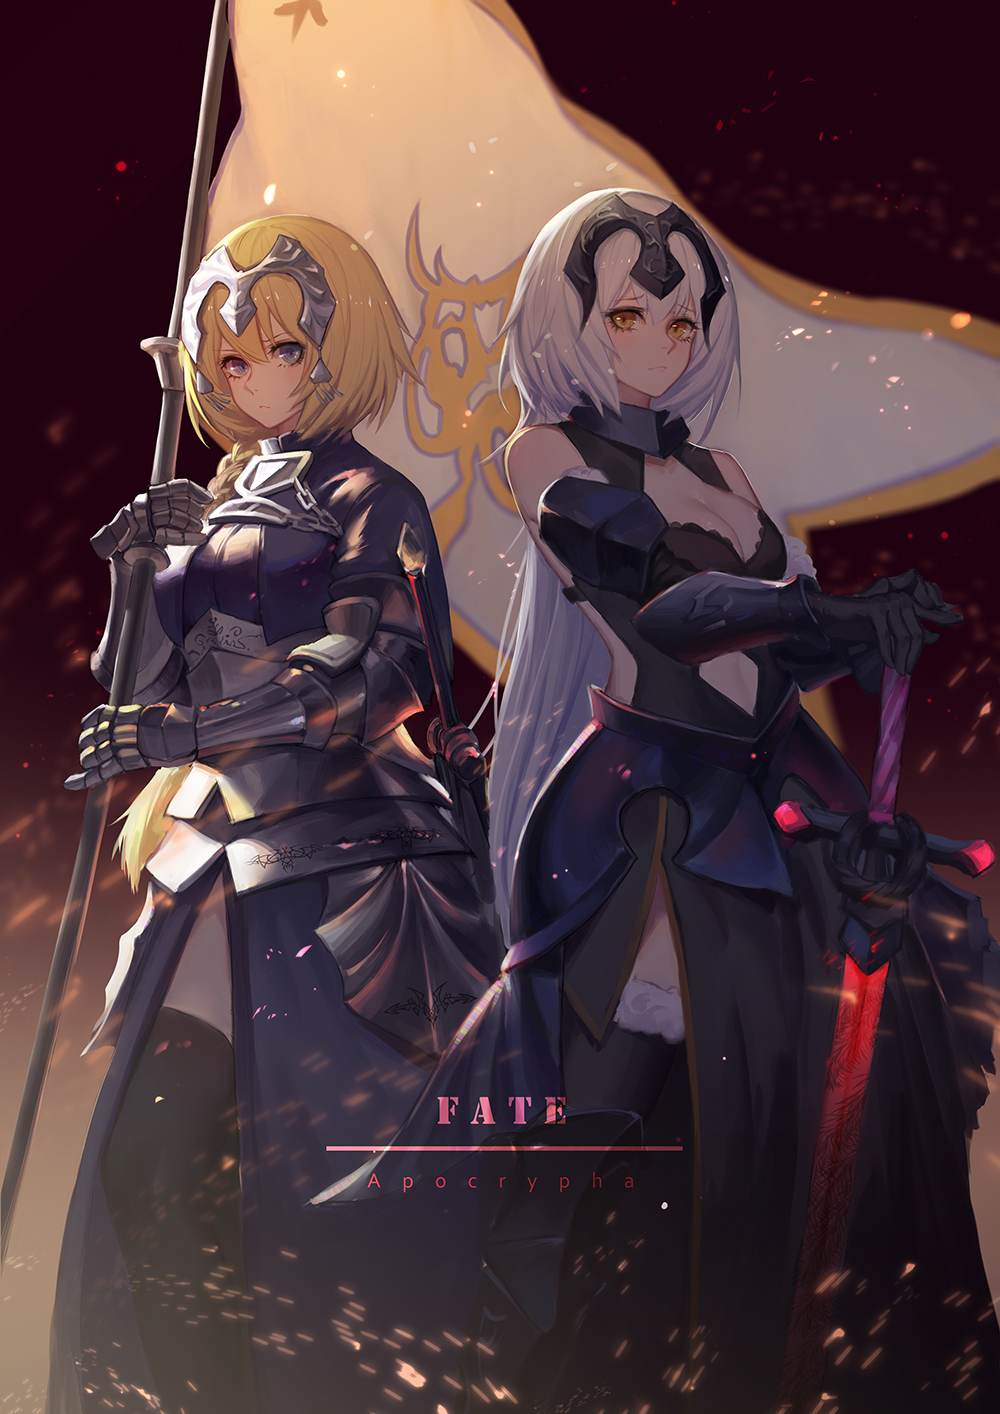 Wallpaper, Fate Series, Fate Apocrypha, Fate Grand Order, anime girls, Ruler Fate Apocrypha, Jeanne d arc alter 1000x1414